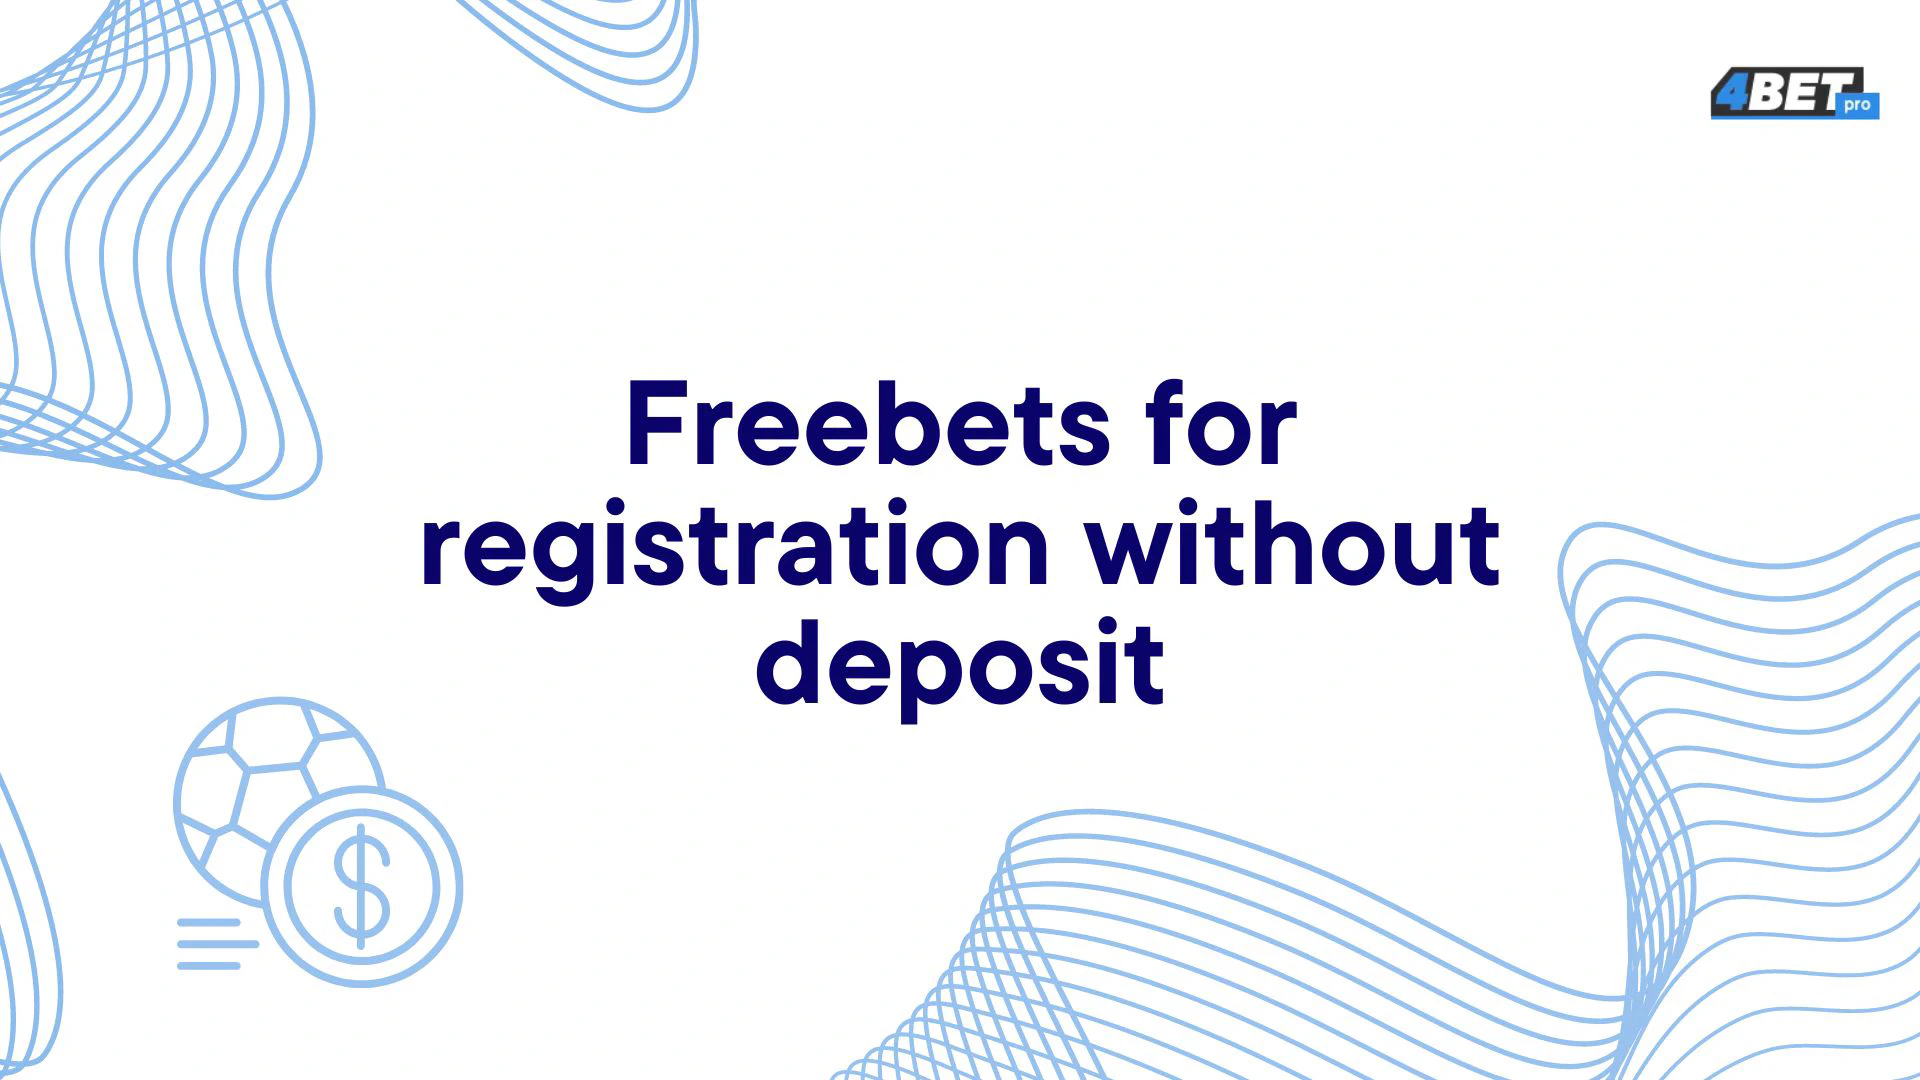 Free-bet for registration in bookmakers without deposit